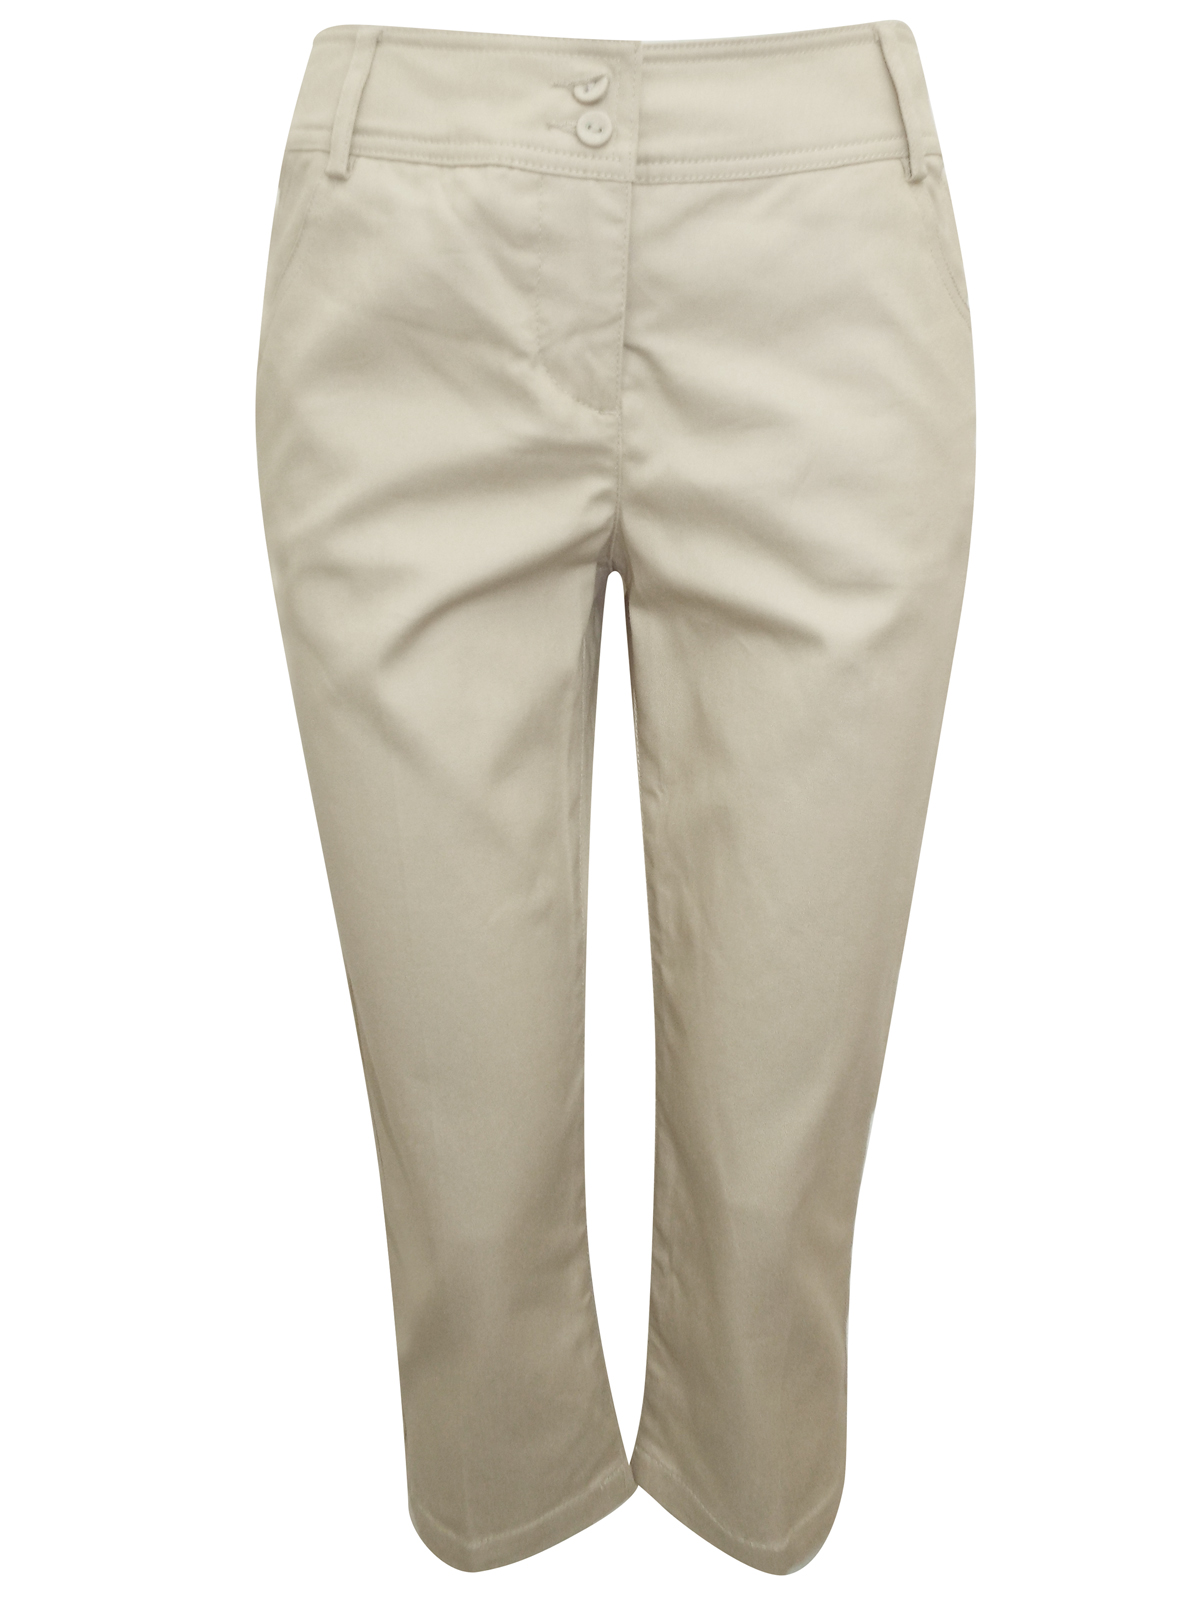 BHS - - BH5 STONE Cotton Rich Cropped Trousers - Size 8 to 12